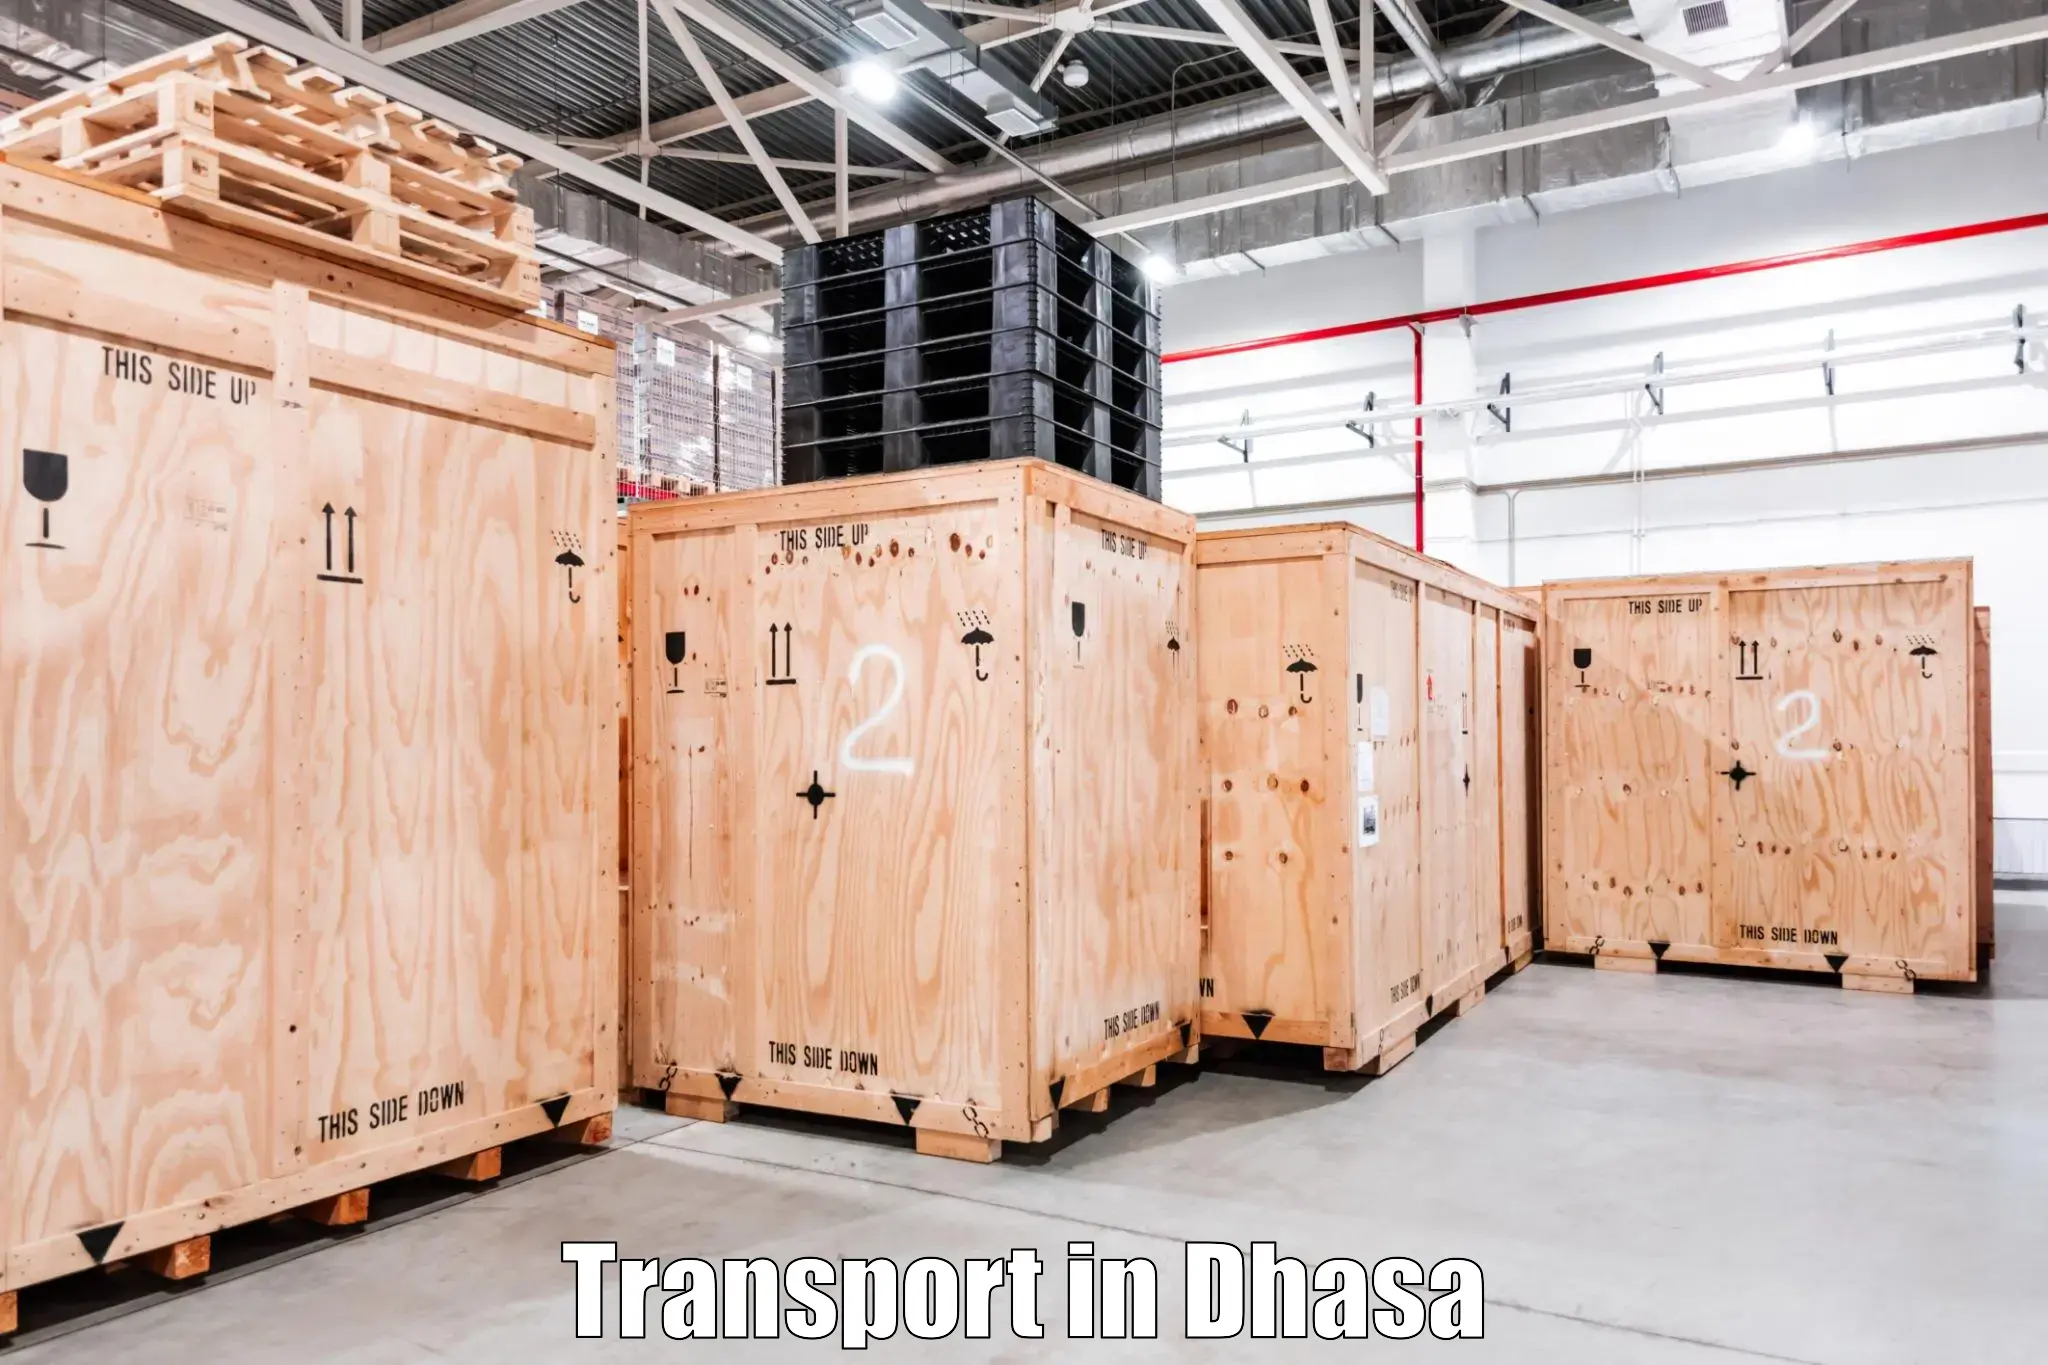 Daily transport service in Dhasa